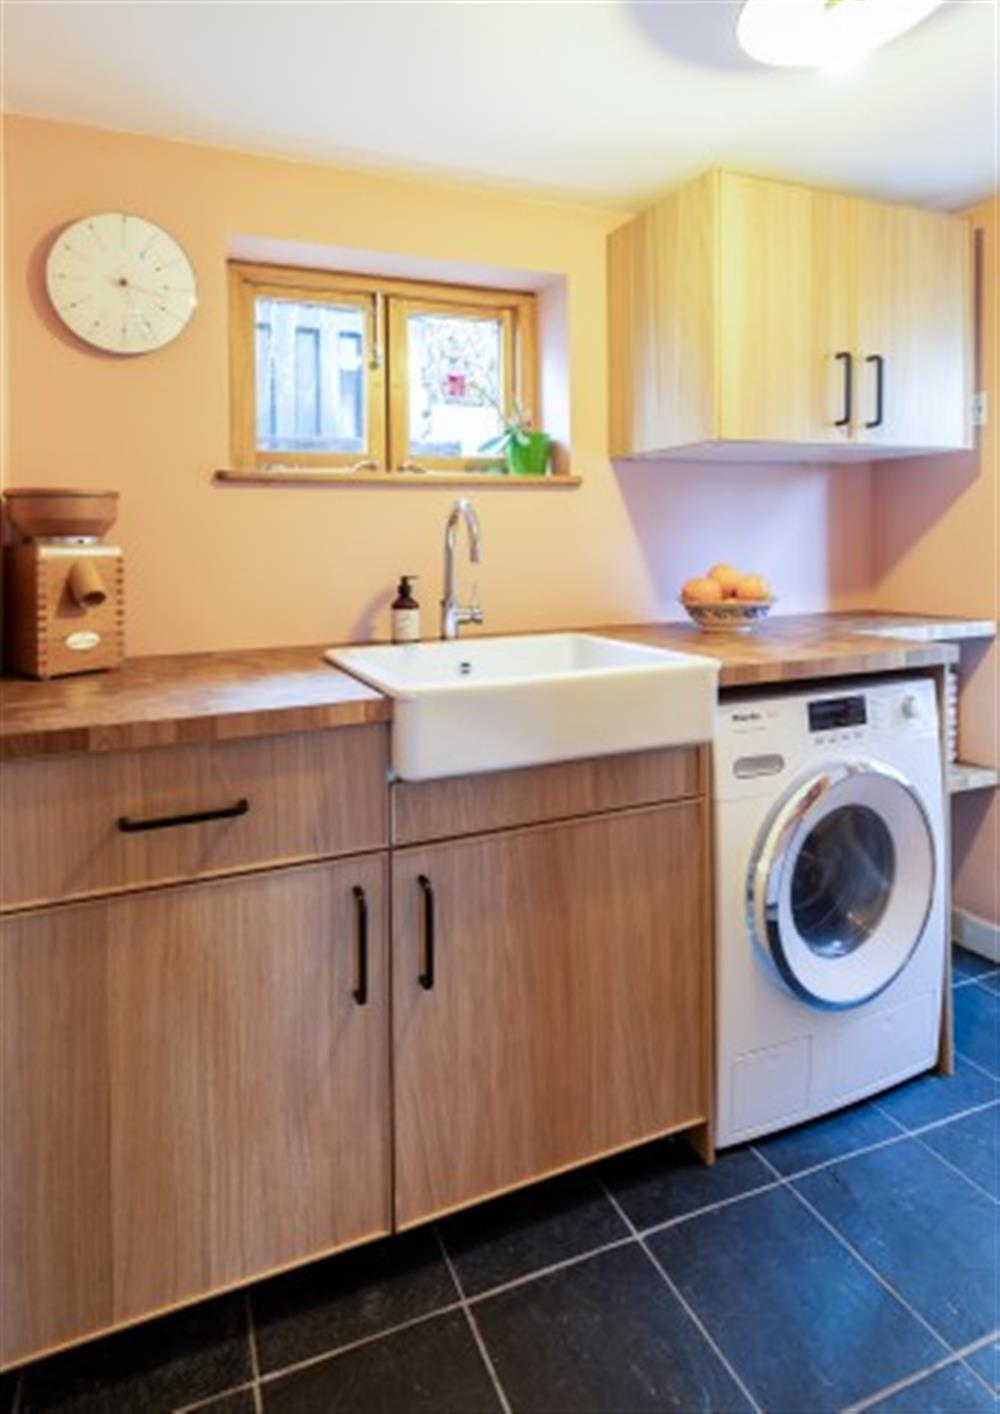 In the utility room, there's a Miele washing machine and belfast sink.